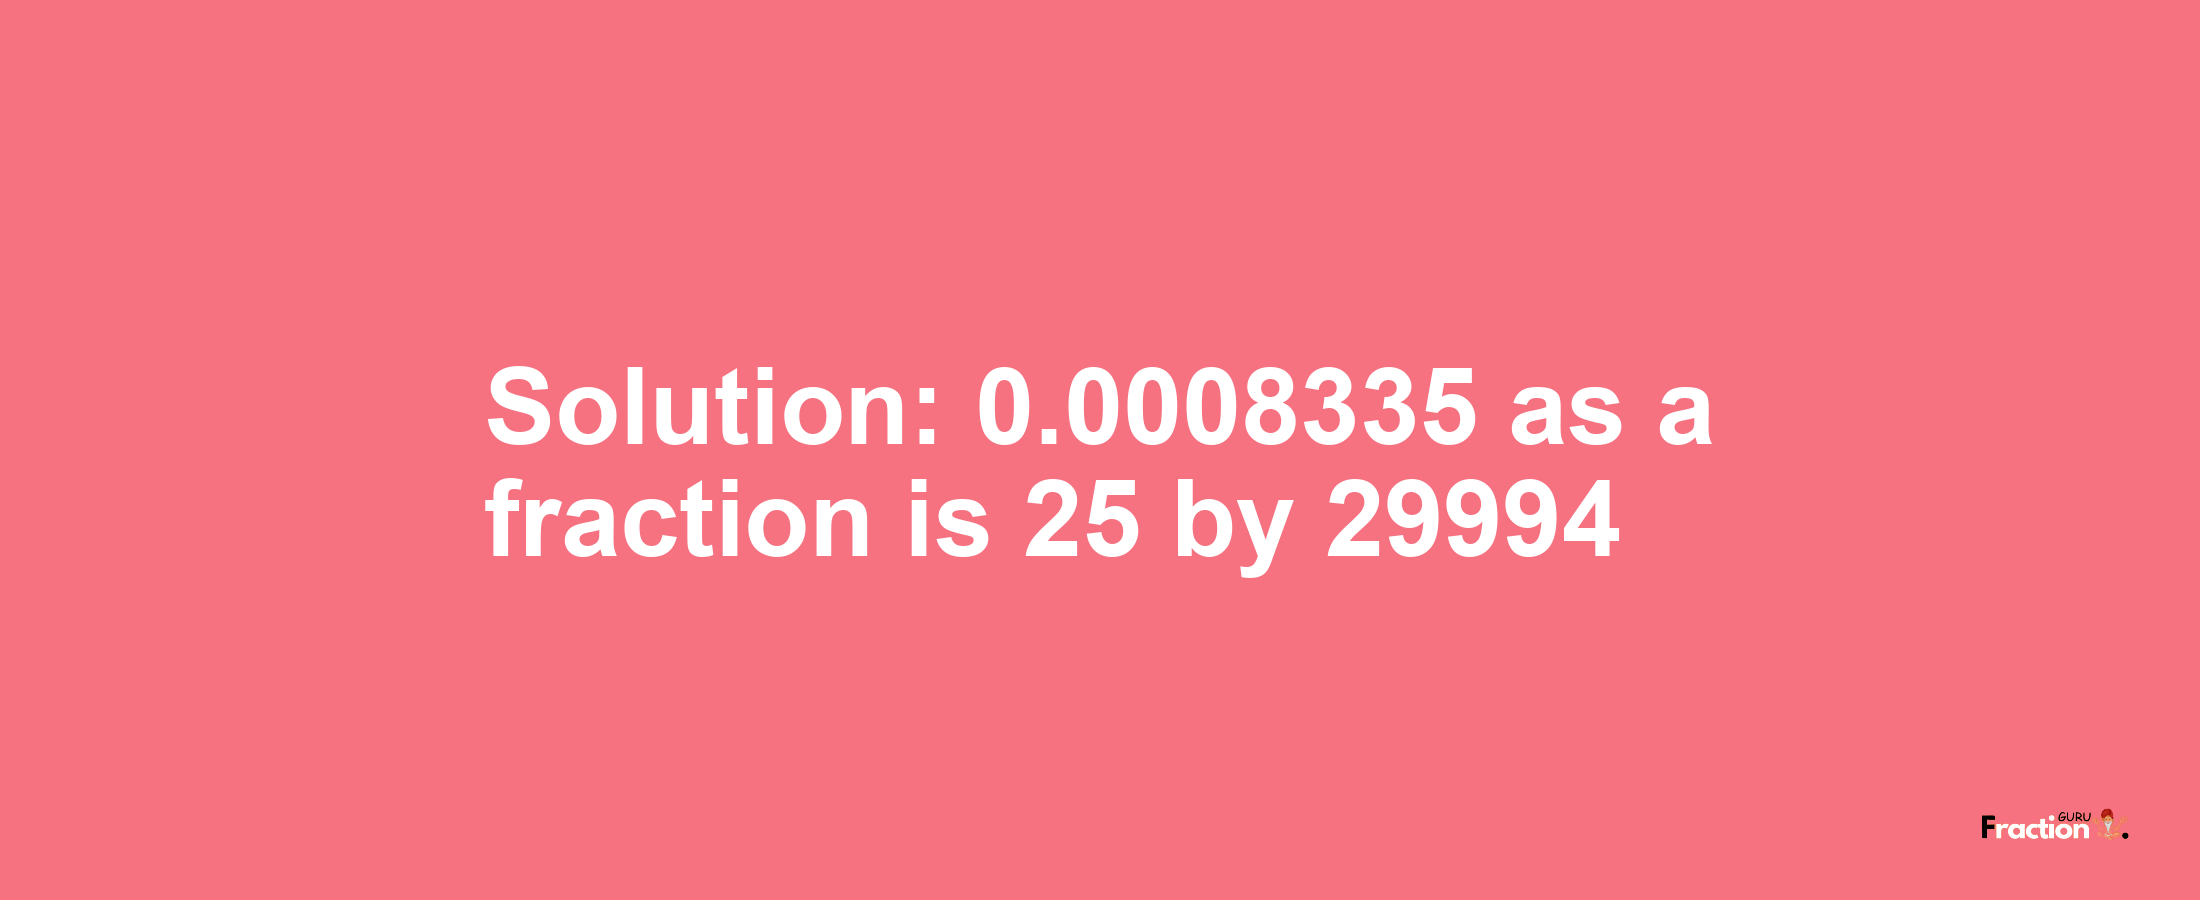 Solution:0.0008335 as a fraction is 25/29994